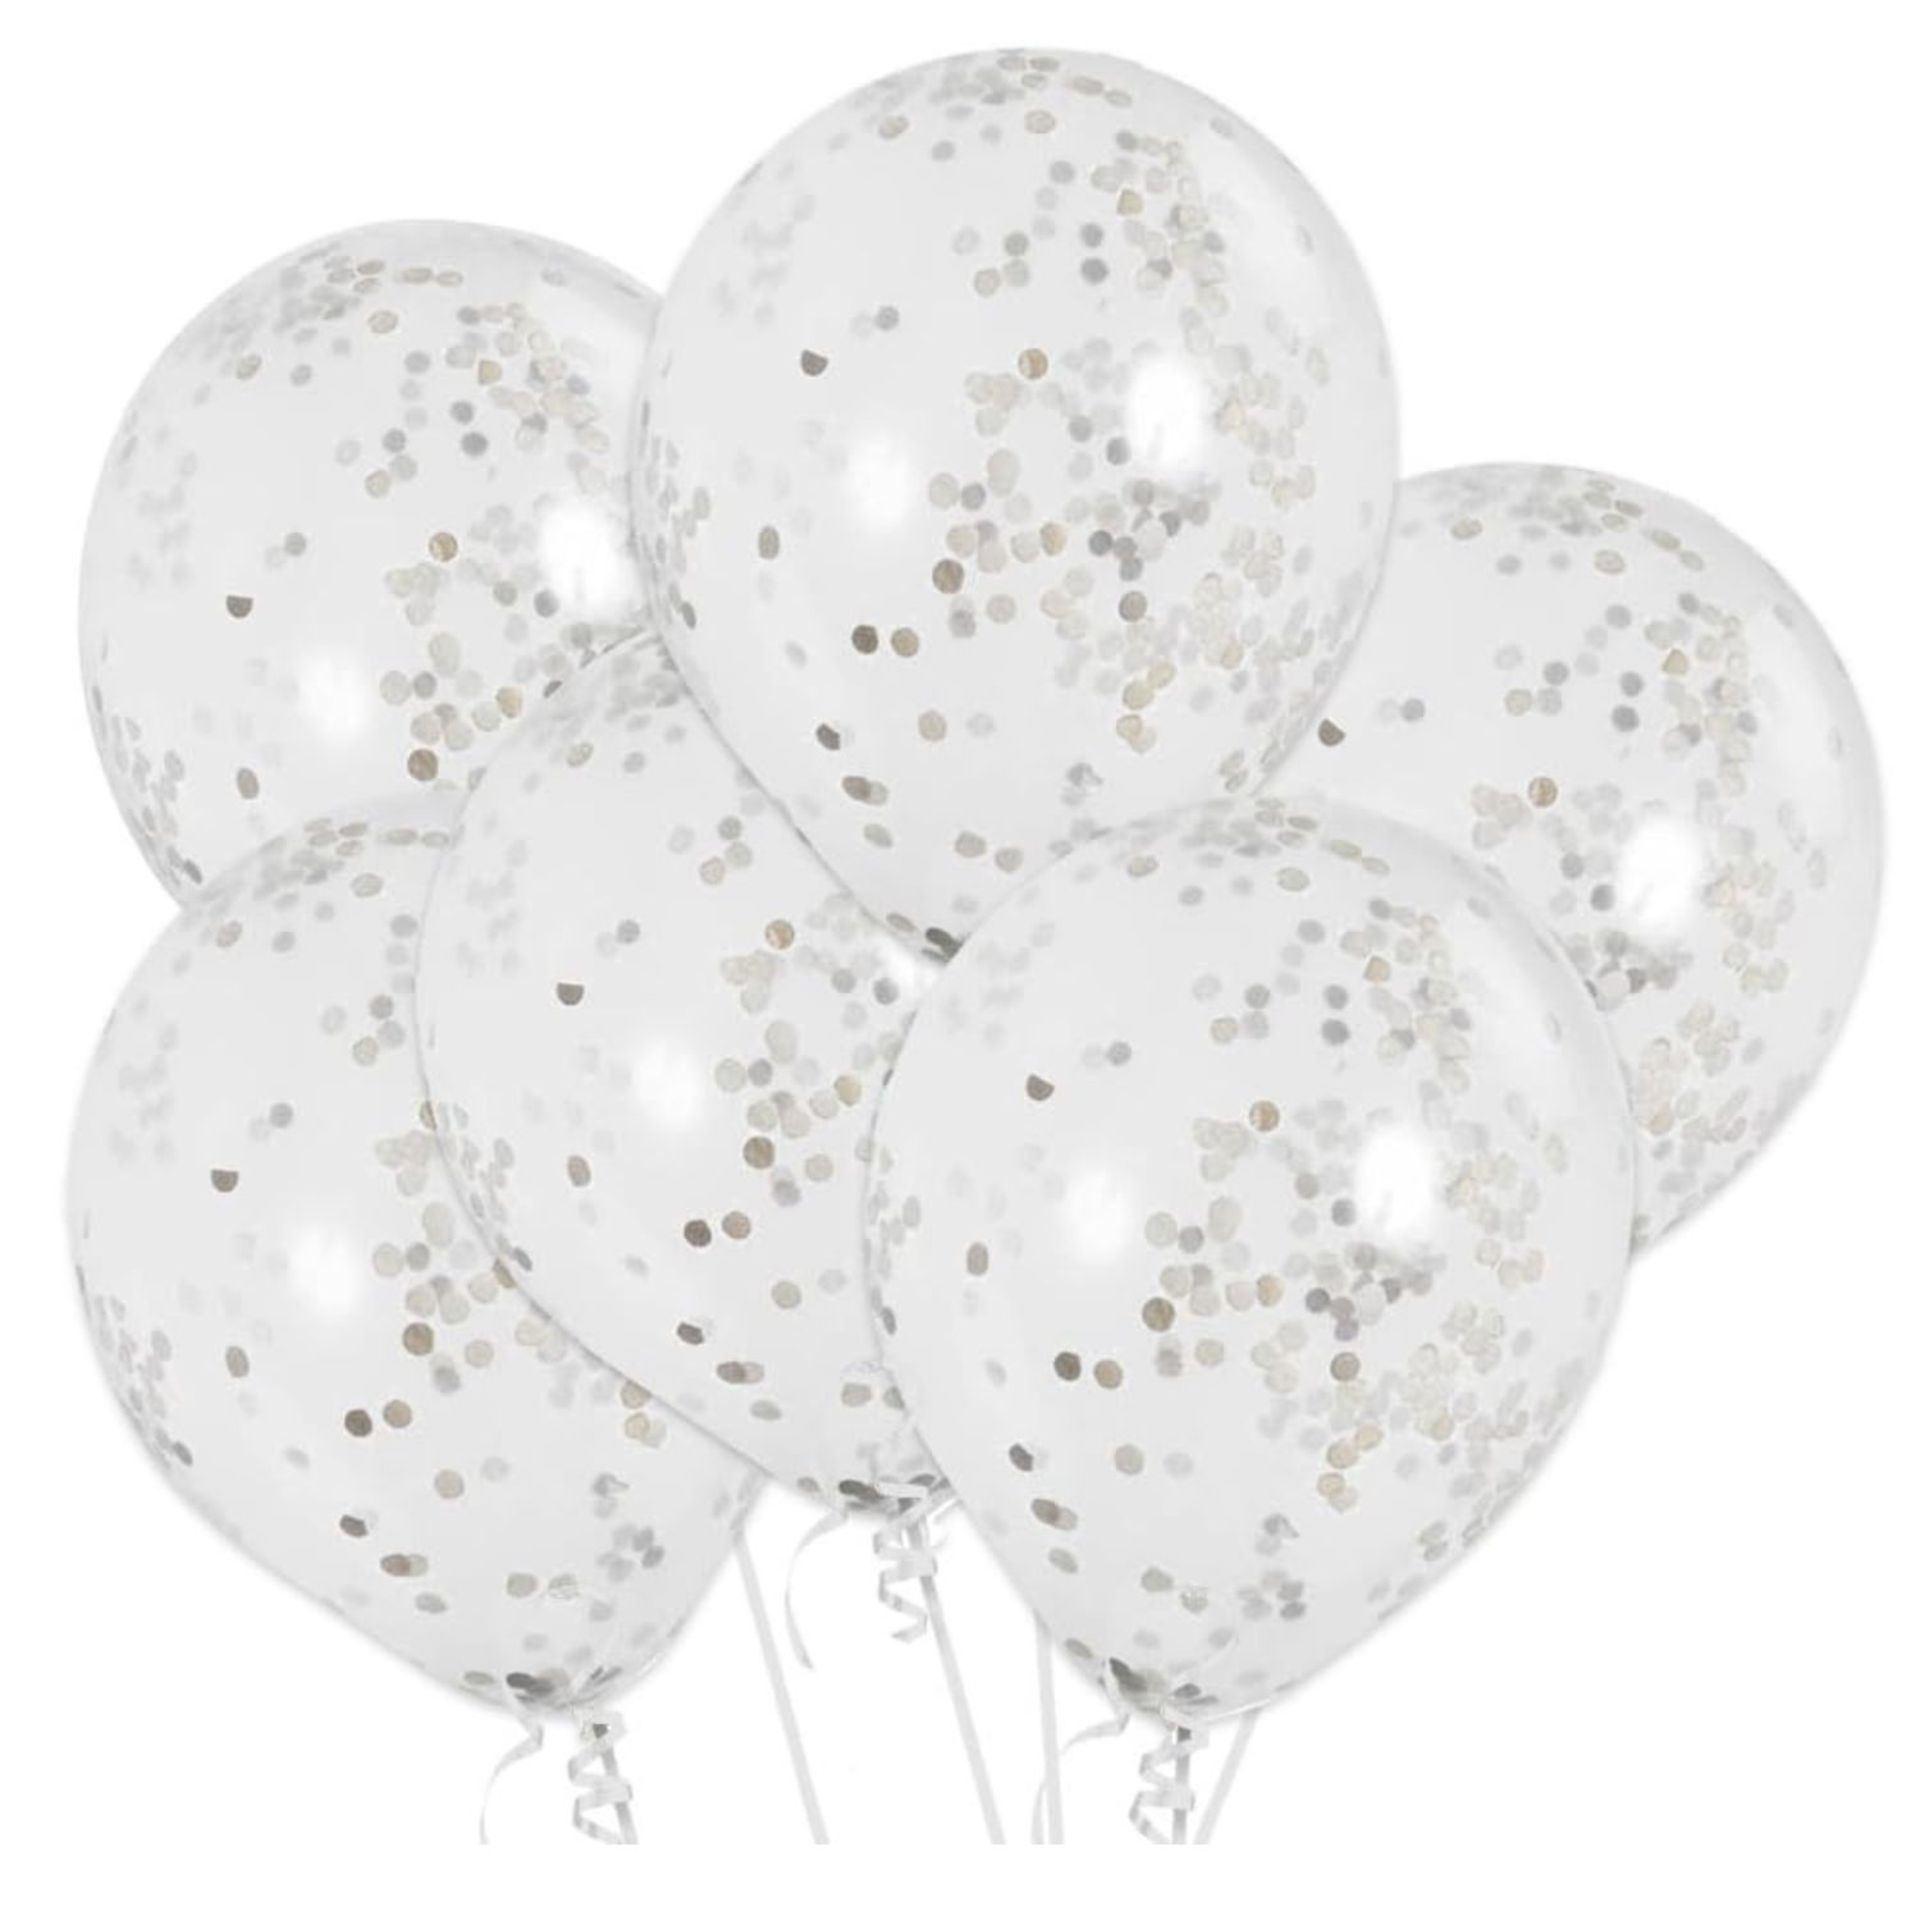 1000 PACKS OF LATEX SILVER AND GOLD CONFETTI BALLOONS, 12IN, 6CT, RRP £10,000 - Image 7 of 7